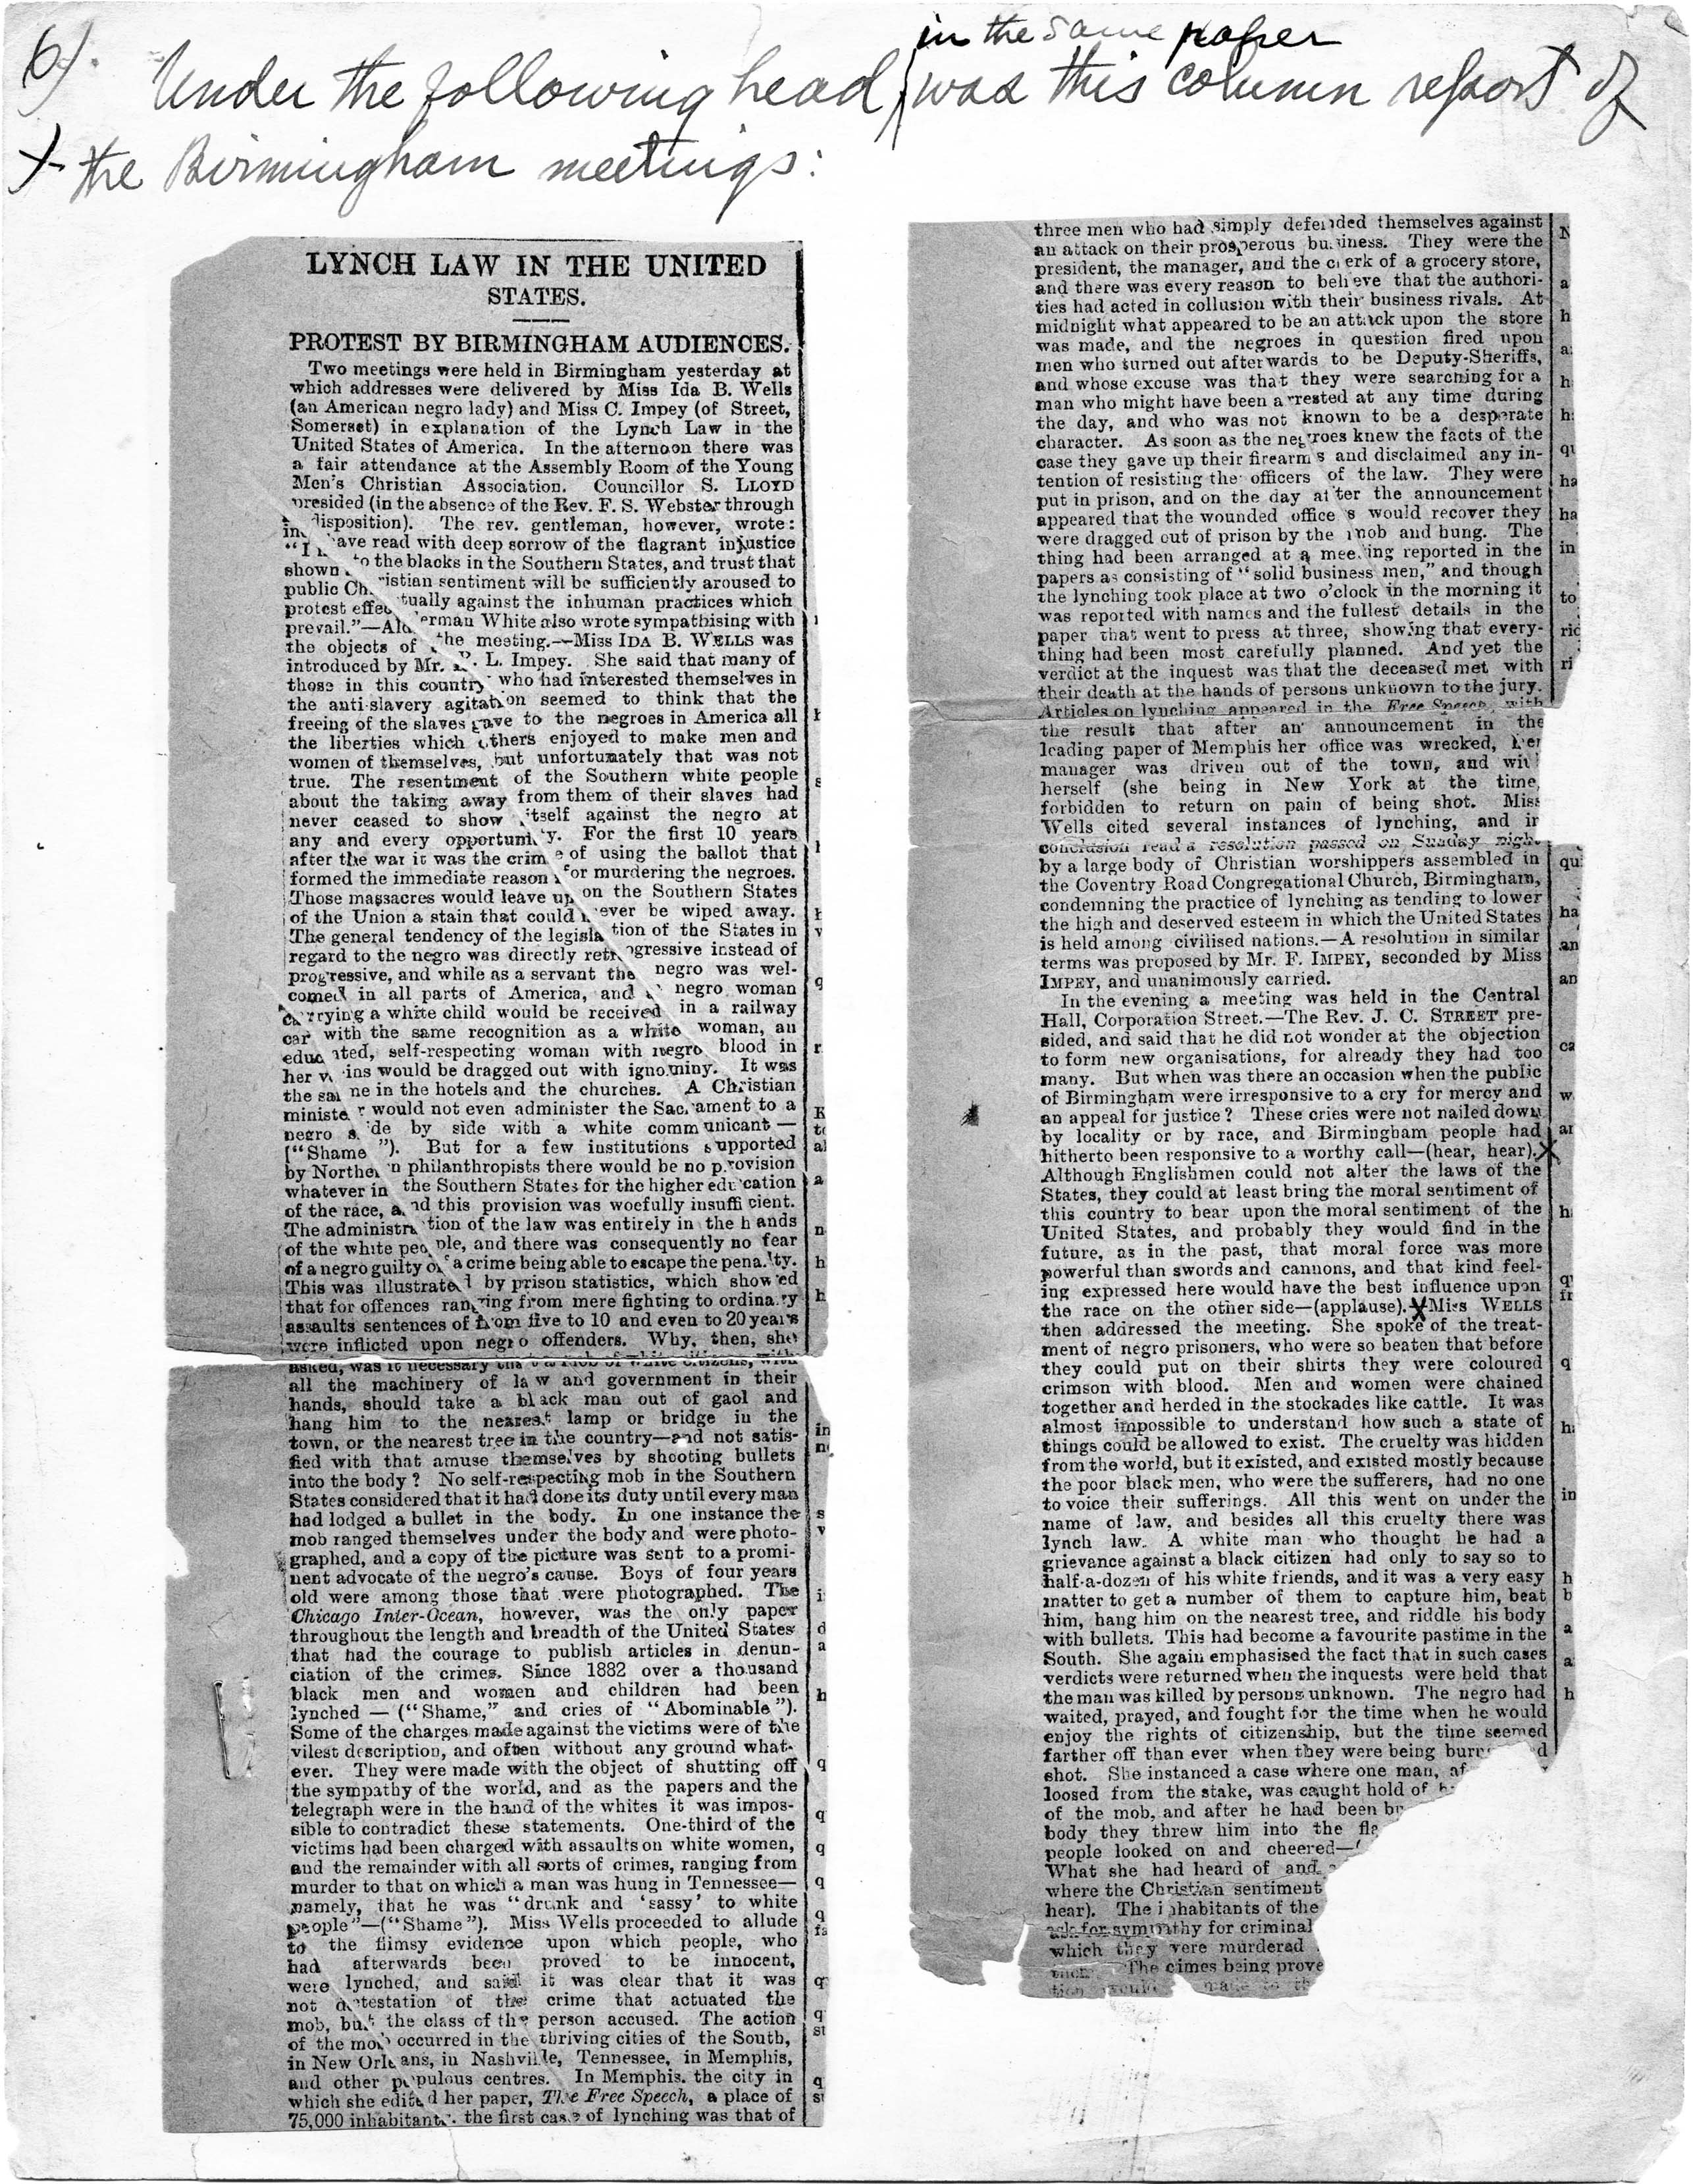 "Lynch Law in the United States," Birmingham Daily Post, [May 17, 1894], [annotated by Ida B. Wells], photocopy of newsclipping pasted to a sheet of paper.